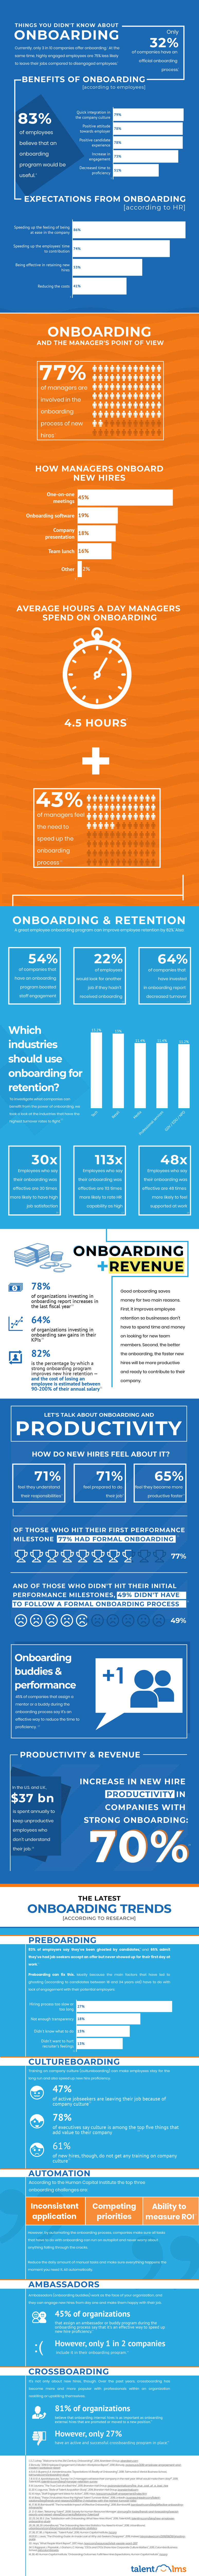 Infographic displaying employee onboarding statistics you didn't know - TalentLMS